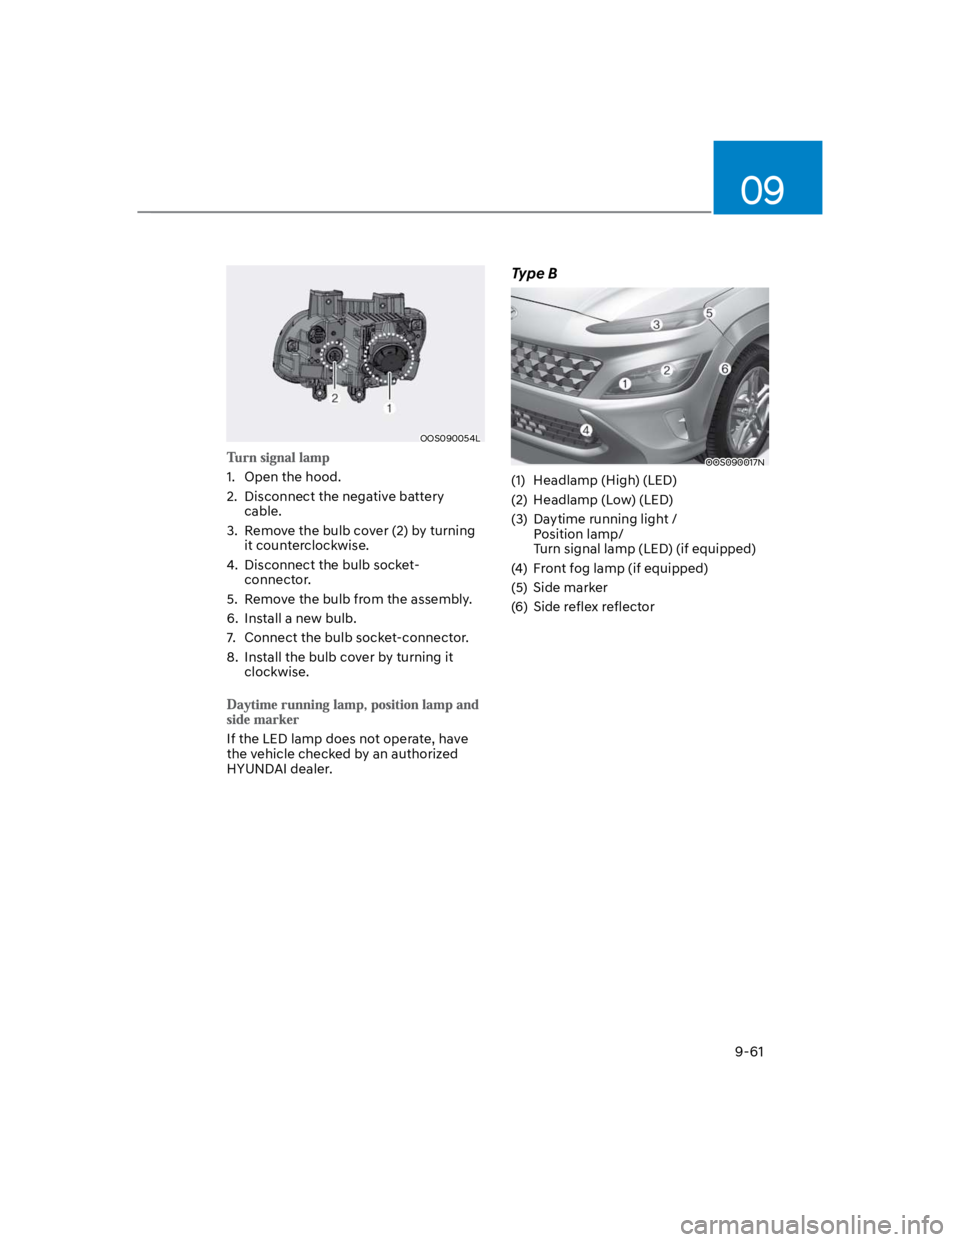 HYUNDAI KONA 2022  Owners Manual 09
9-61
OOS090054L
1.  Open the hood.
2.  Disconnect the negative battery 
cable.
3.  Remove the bulb cover (2) by turning 
it counterclockwise.
4.  Disconnect the bulb socket-
connector. 
5.  Remove 